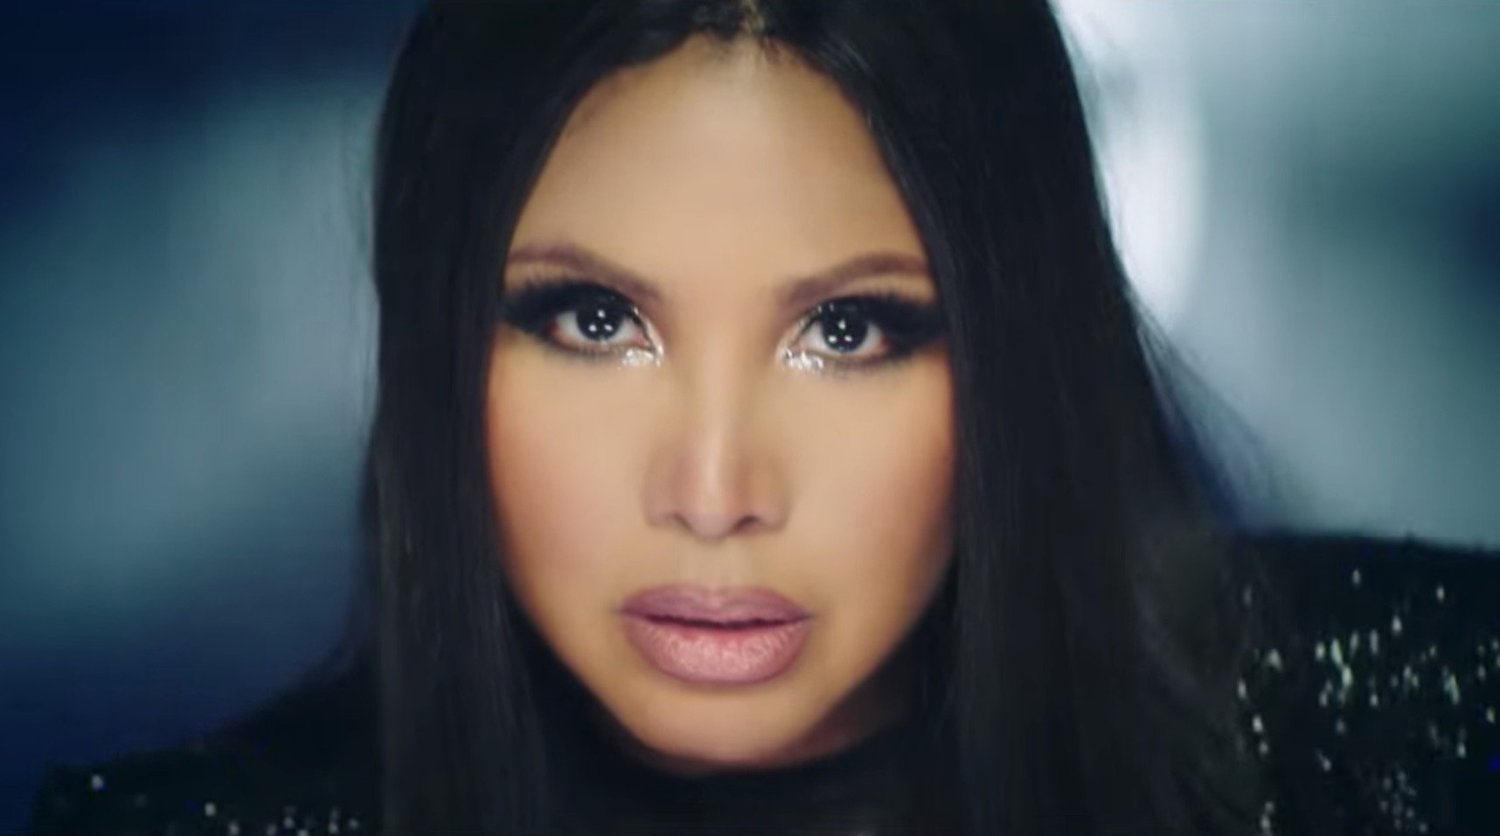 VIDEO Watch Toni Braxton's New Music Video for LONG AS I LIVE Video